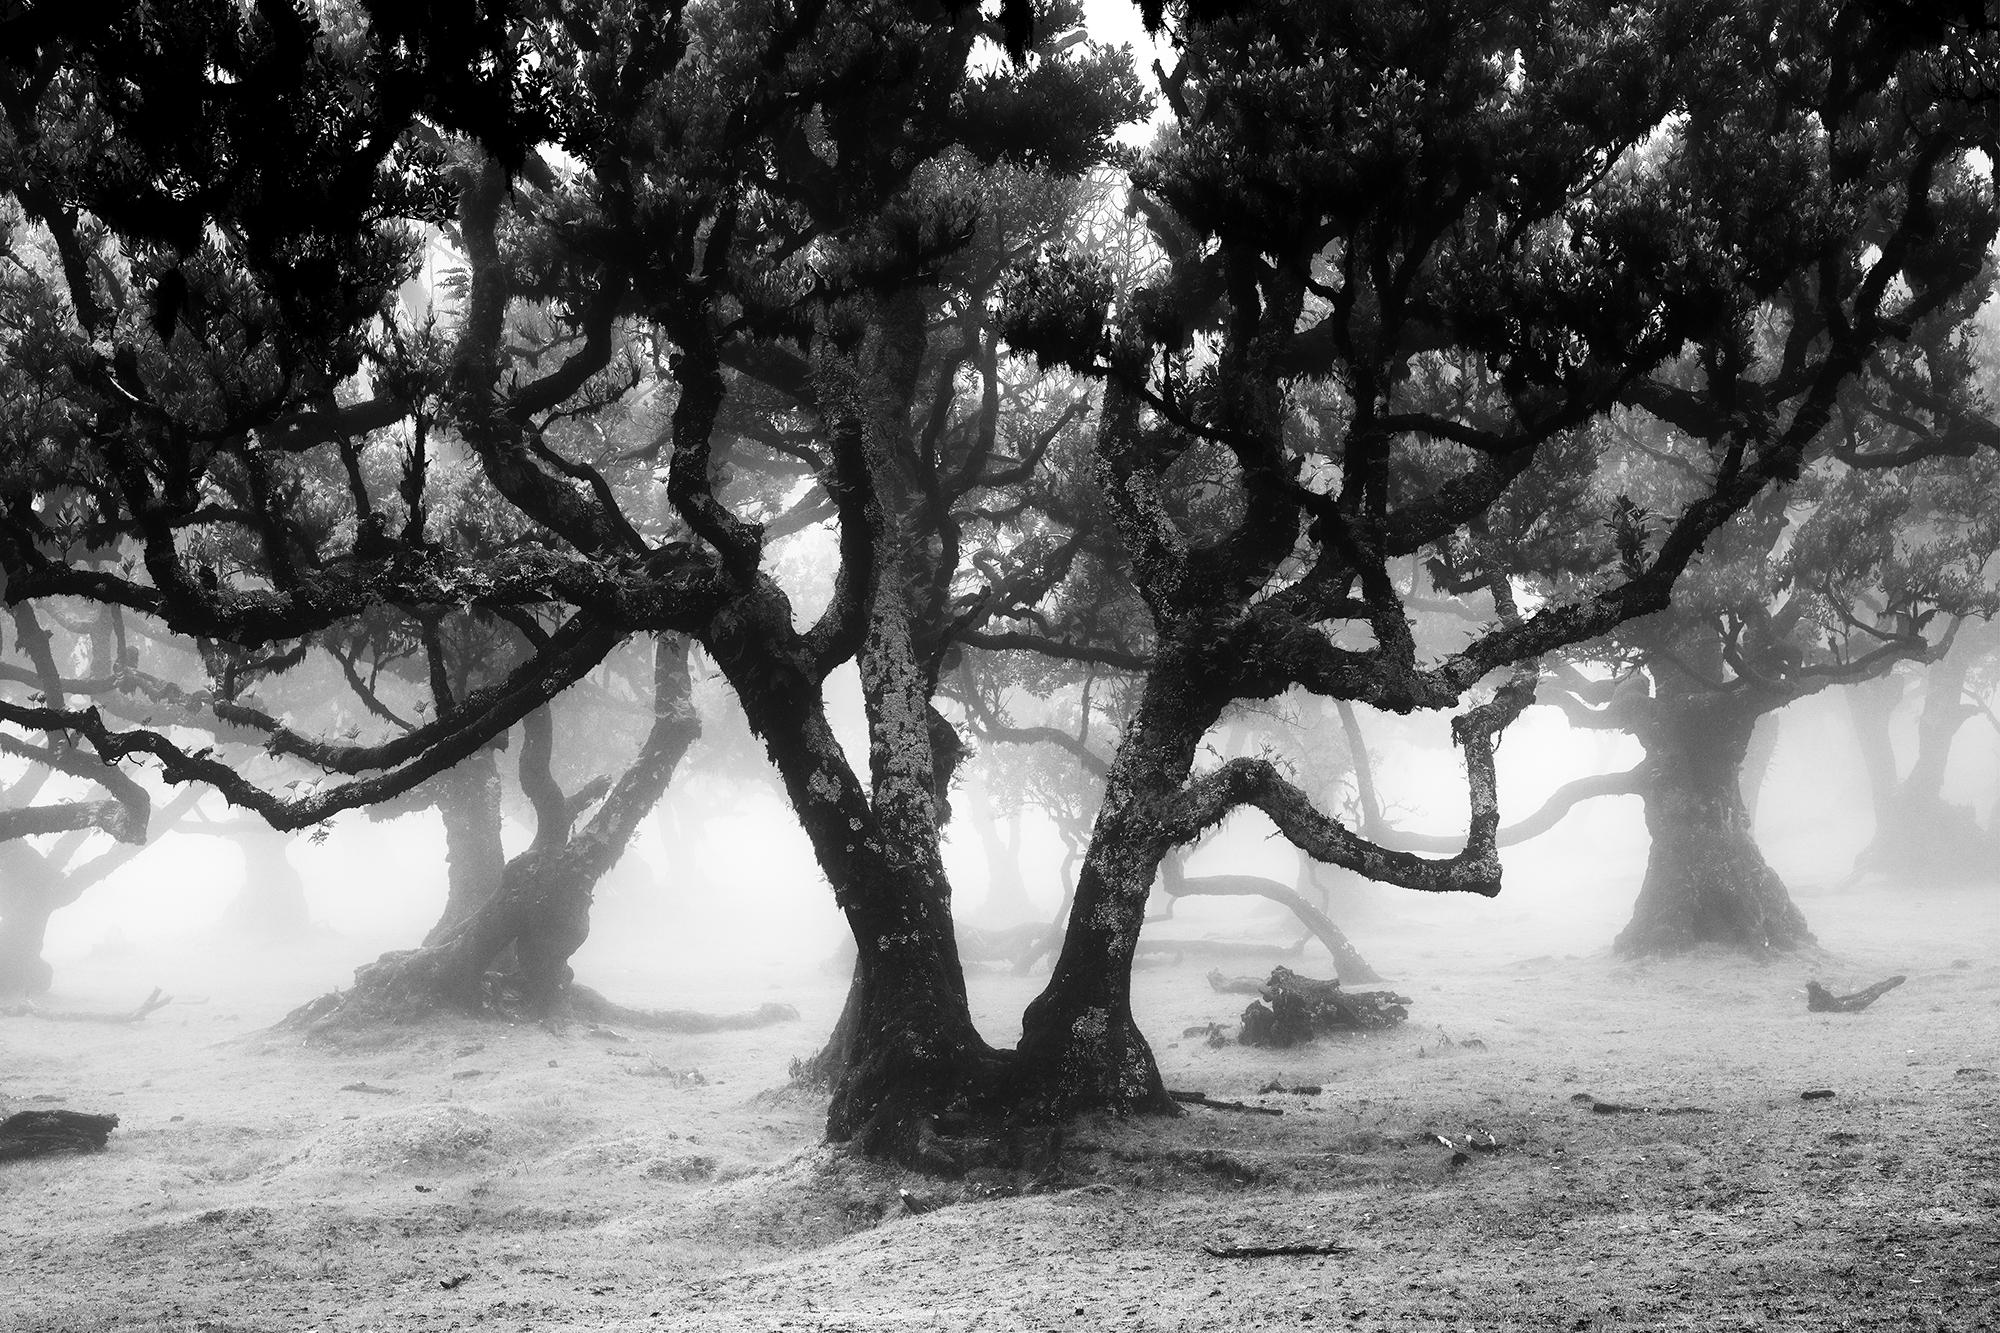 Ancient Laurisilva Forest, mystical Tree, black and white photography, landscape